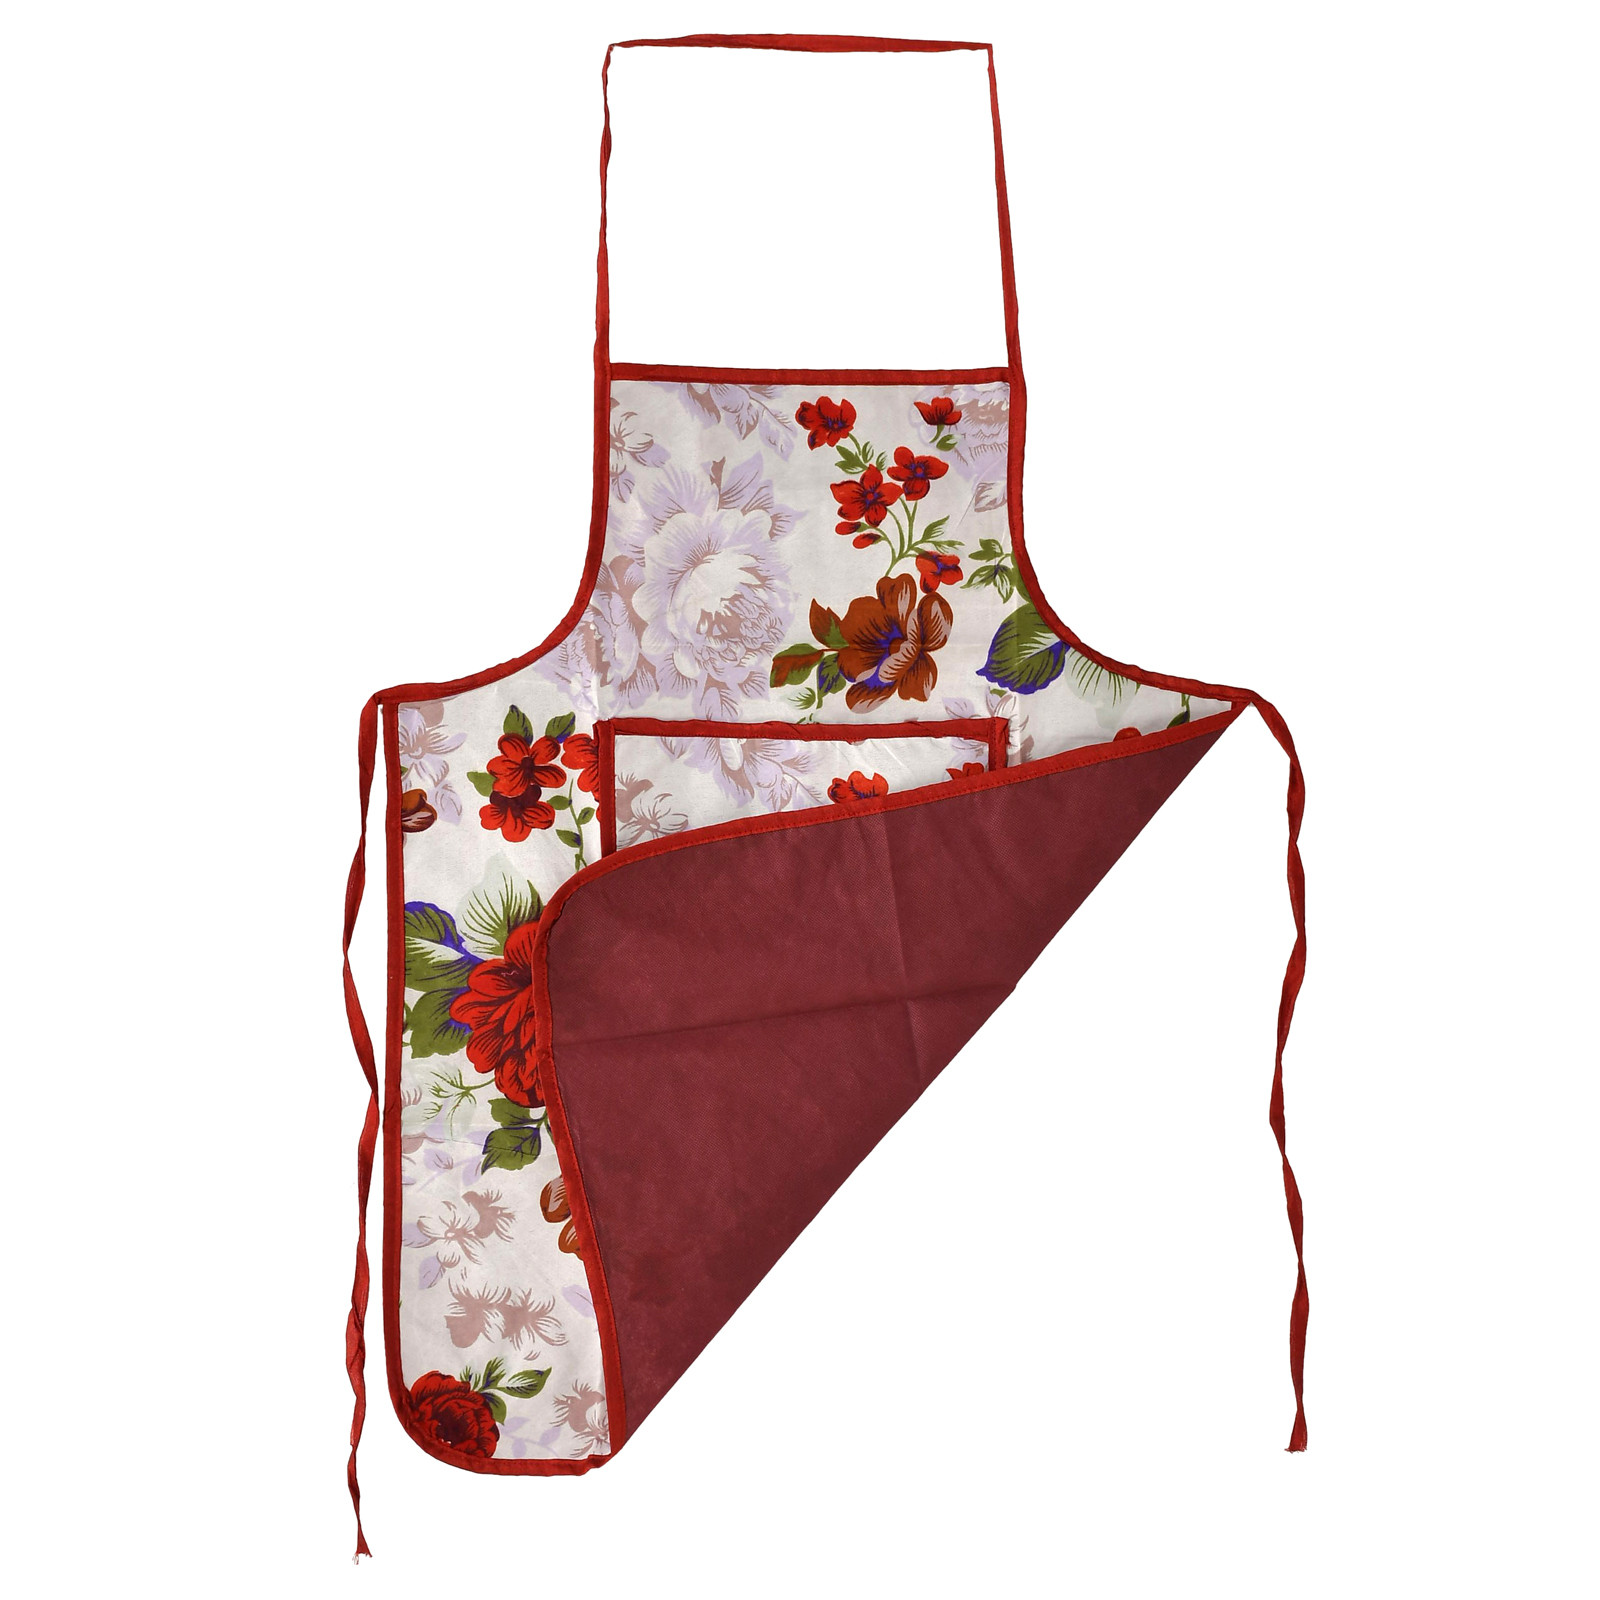 Kuber Industries Printed Apron with 1Front Pocket, Pack of 3 (Pink & Red & Pink)